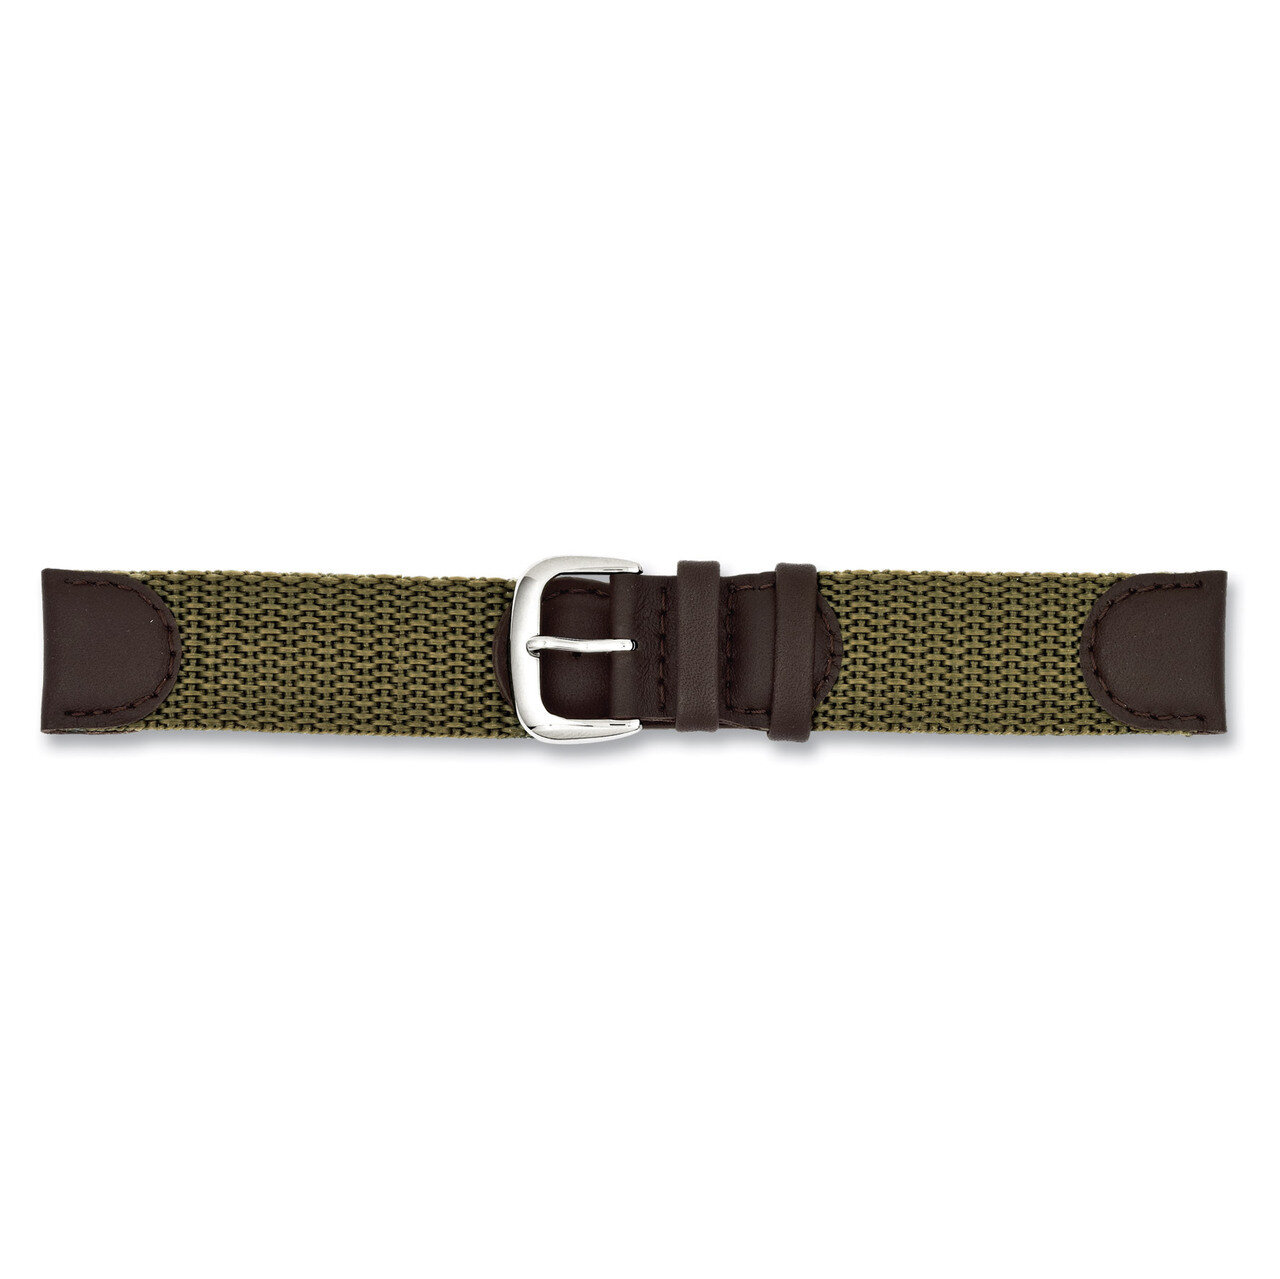 18mm Olive Army Style Nylon Leather Watch Band 7.5 Inch Silver-tone Buckle BA301-18